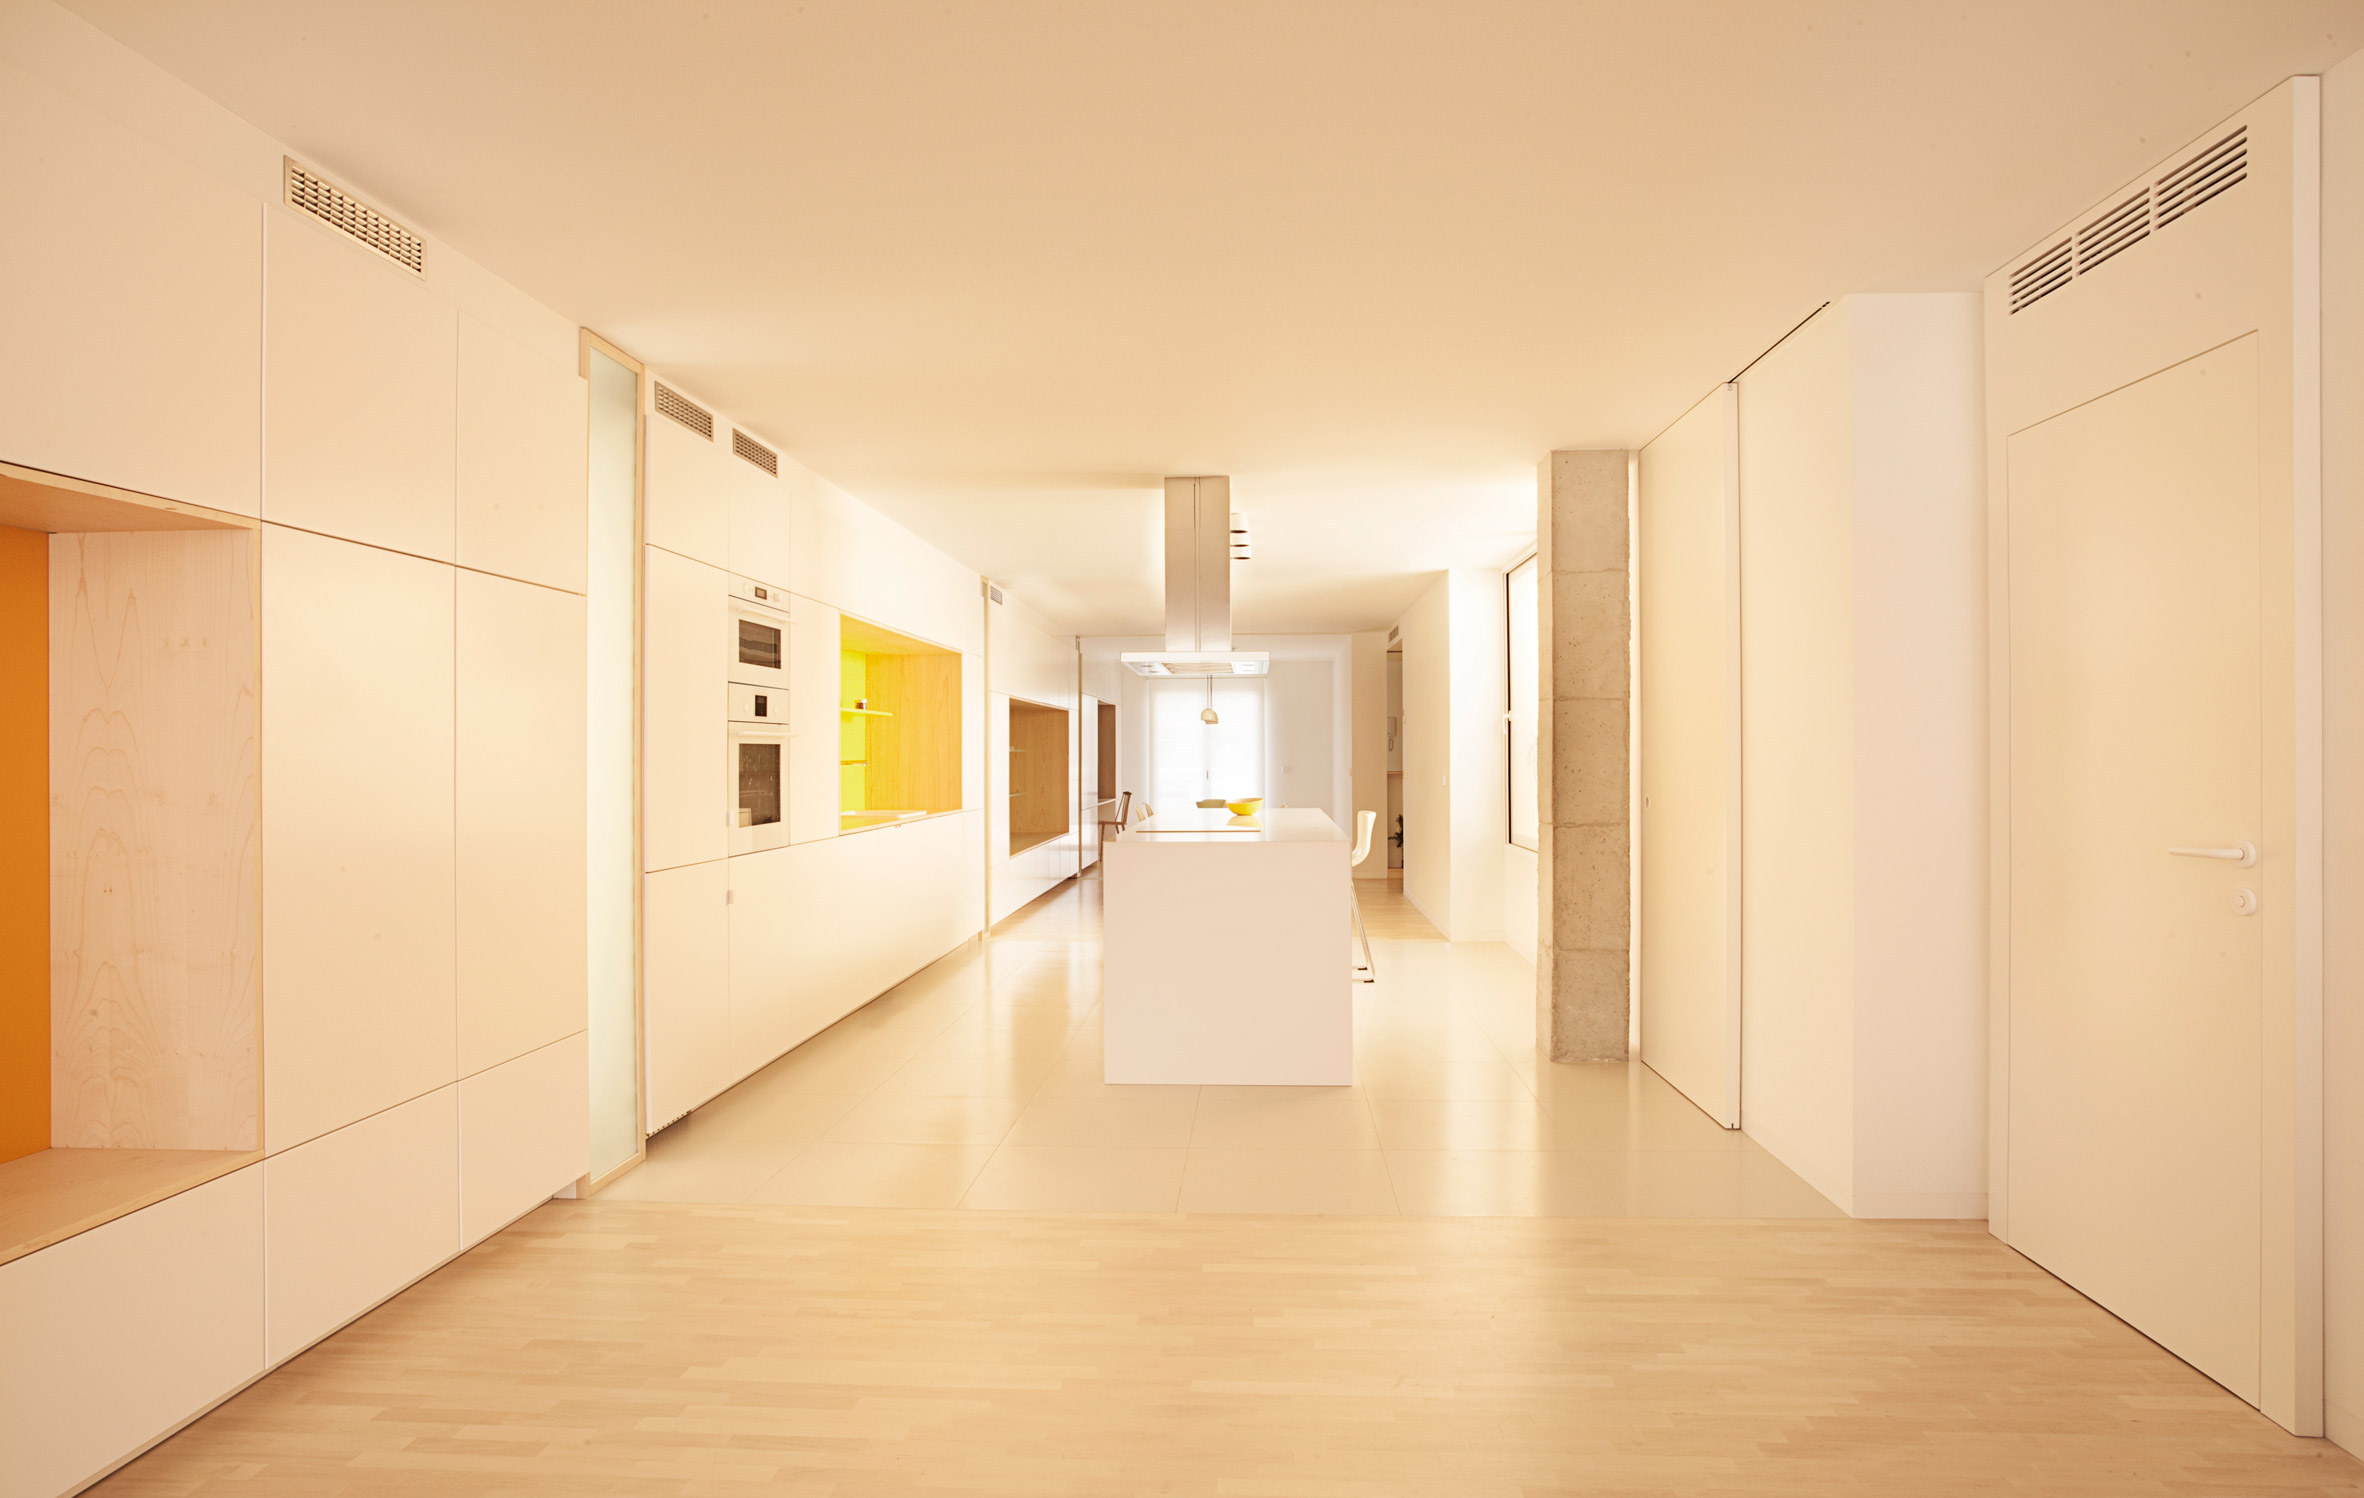 Alicante apartment renovated by Diego Lo?pez Fuster Arquitectura references Hay products